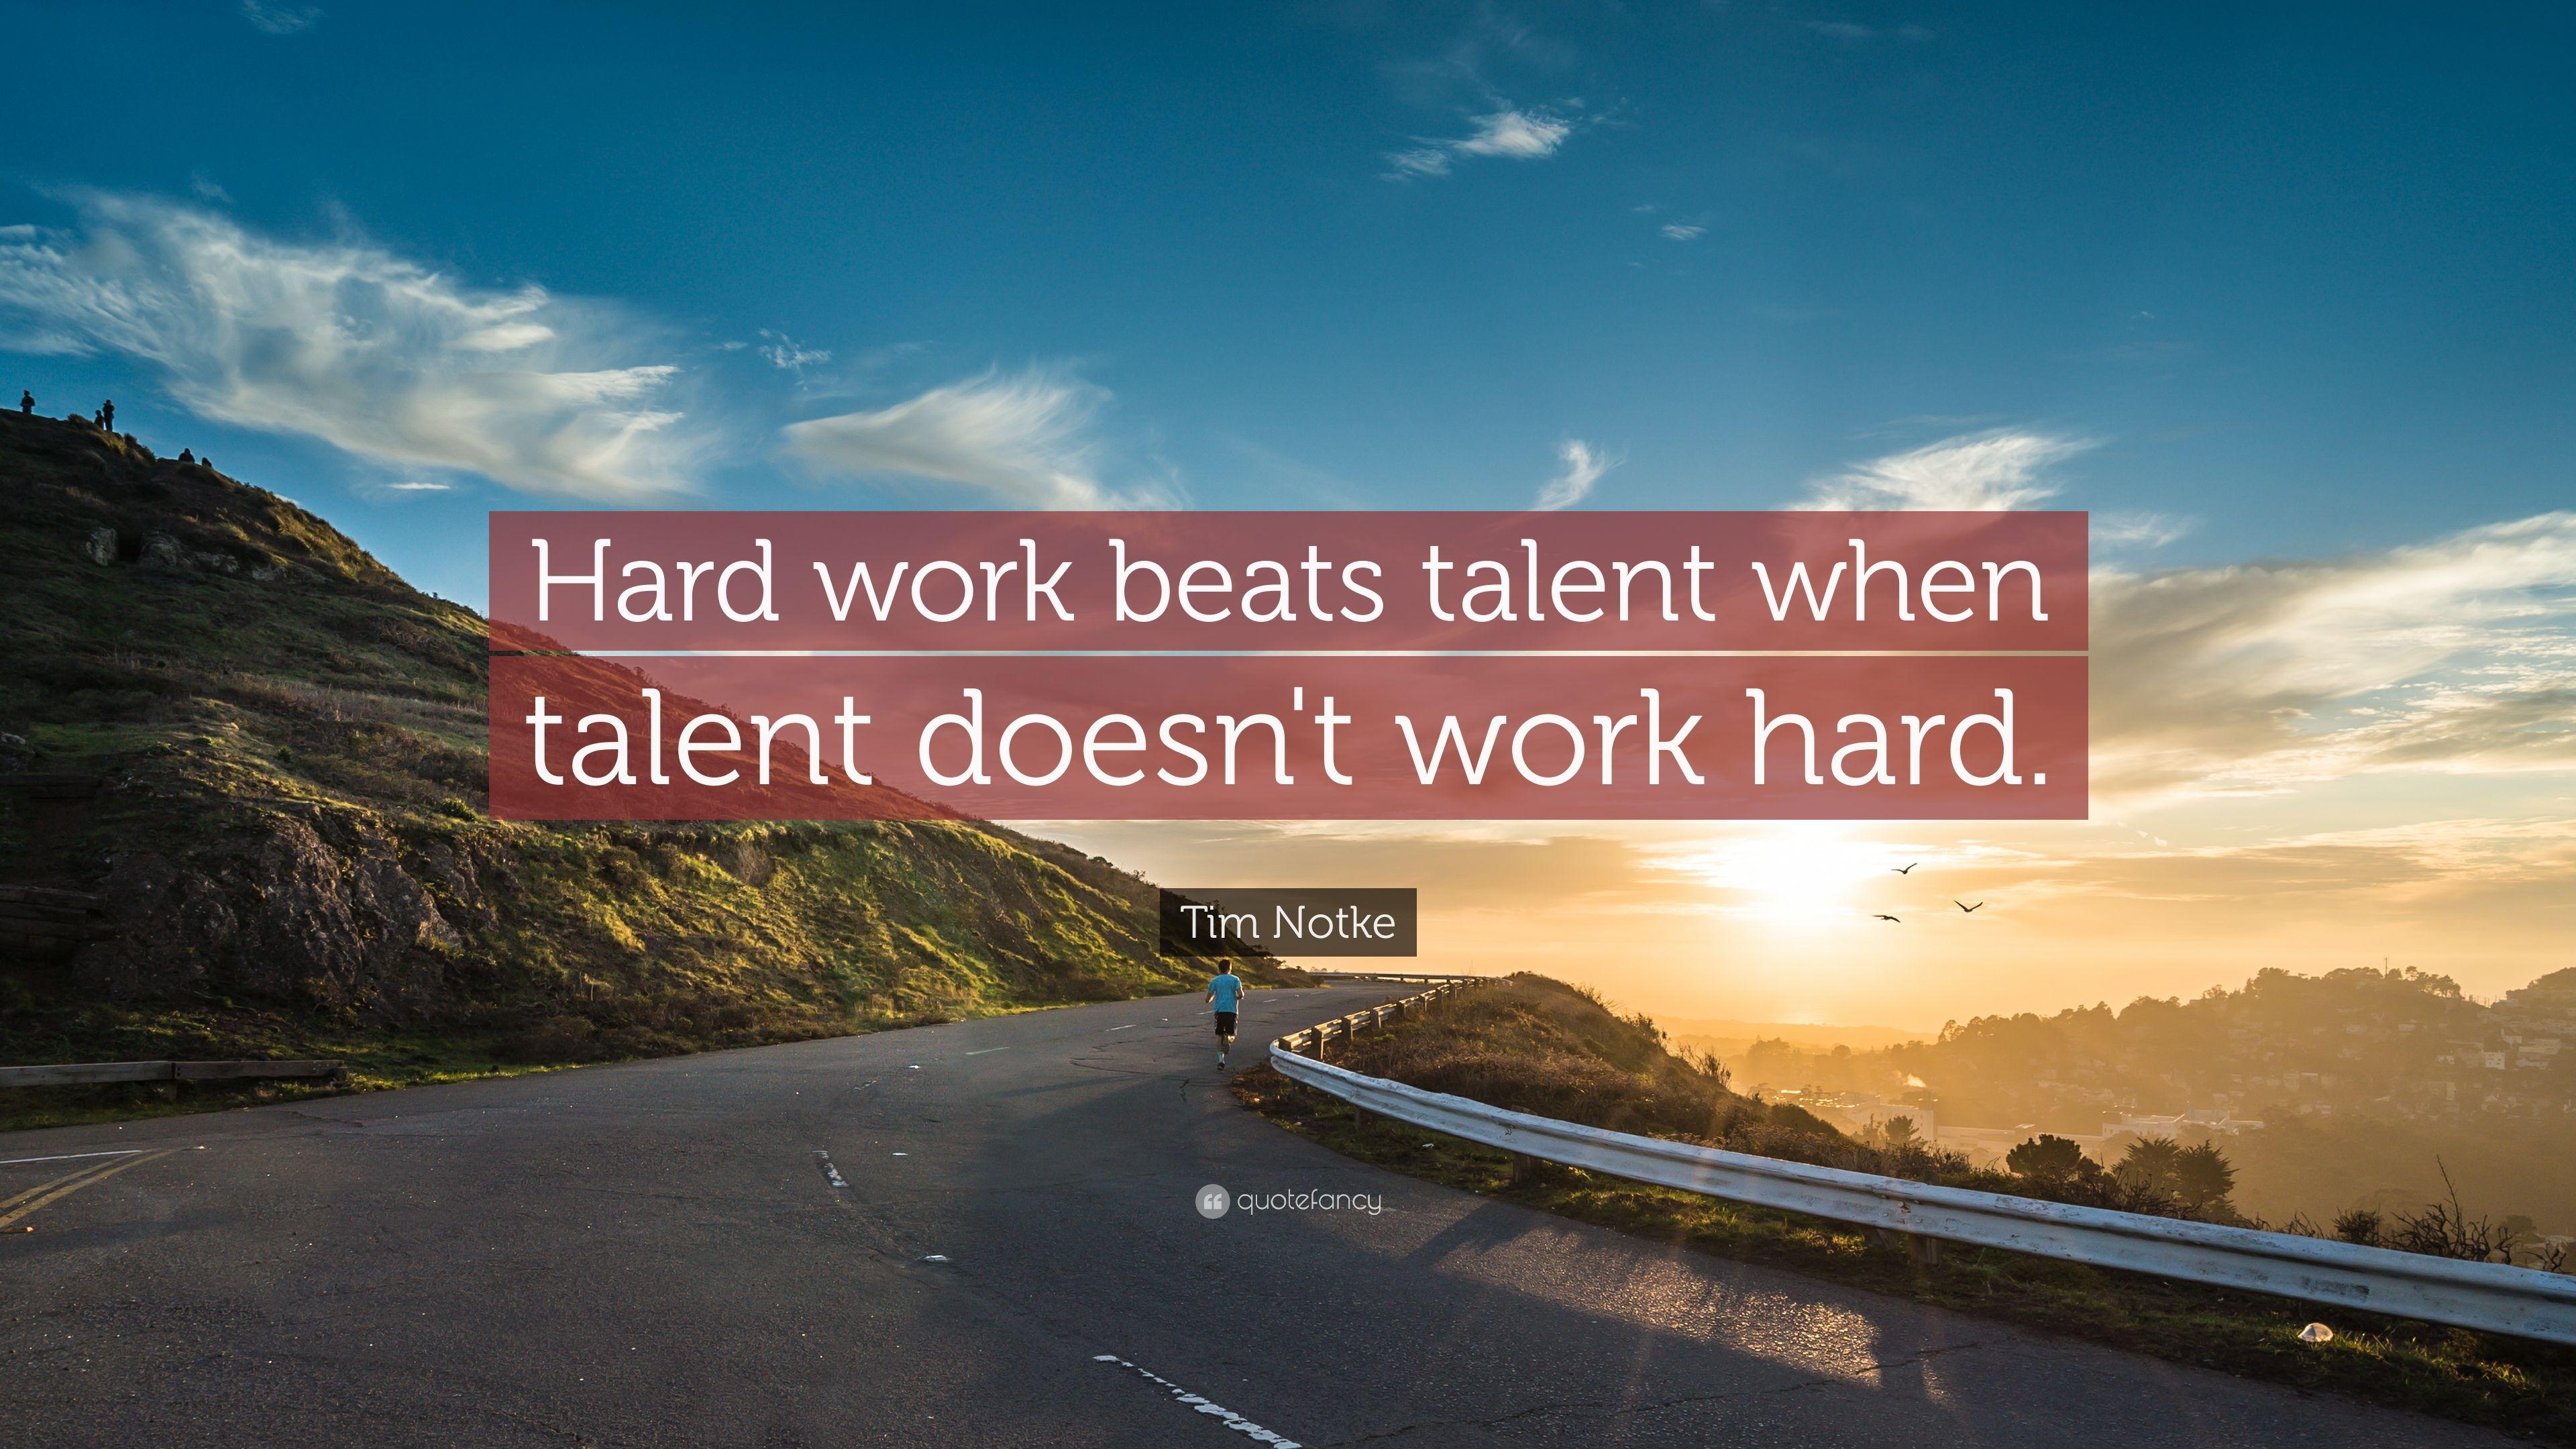 Tim Notke Quote: “Hard work beats talent when talent doesn't work